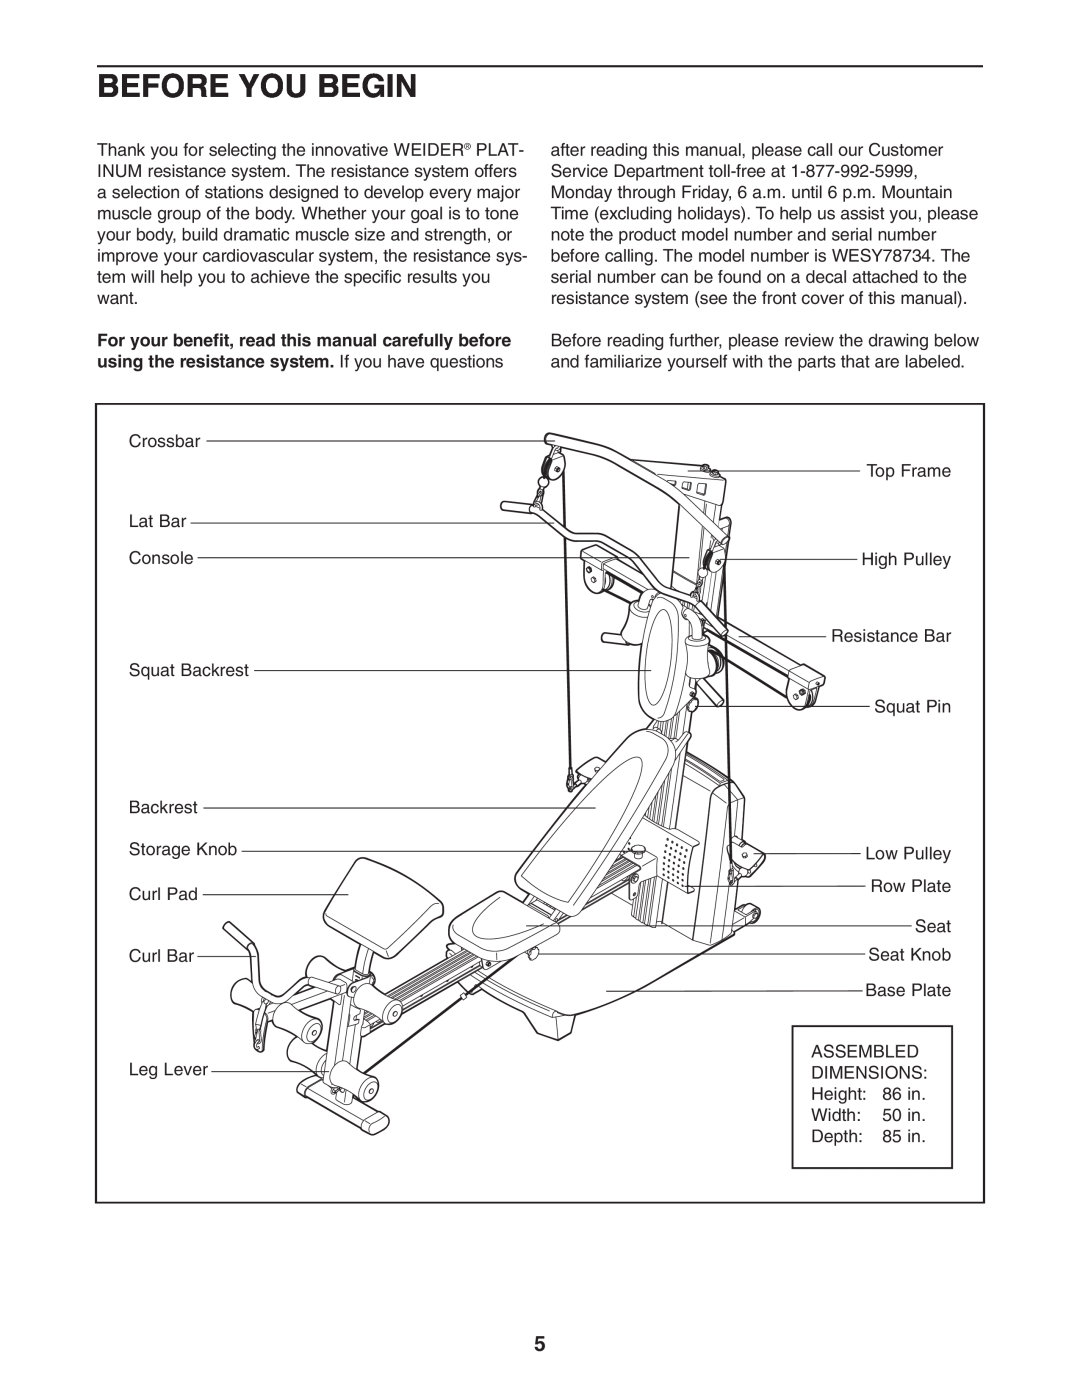 Weider WESY78734 user manual Before You Begin 